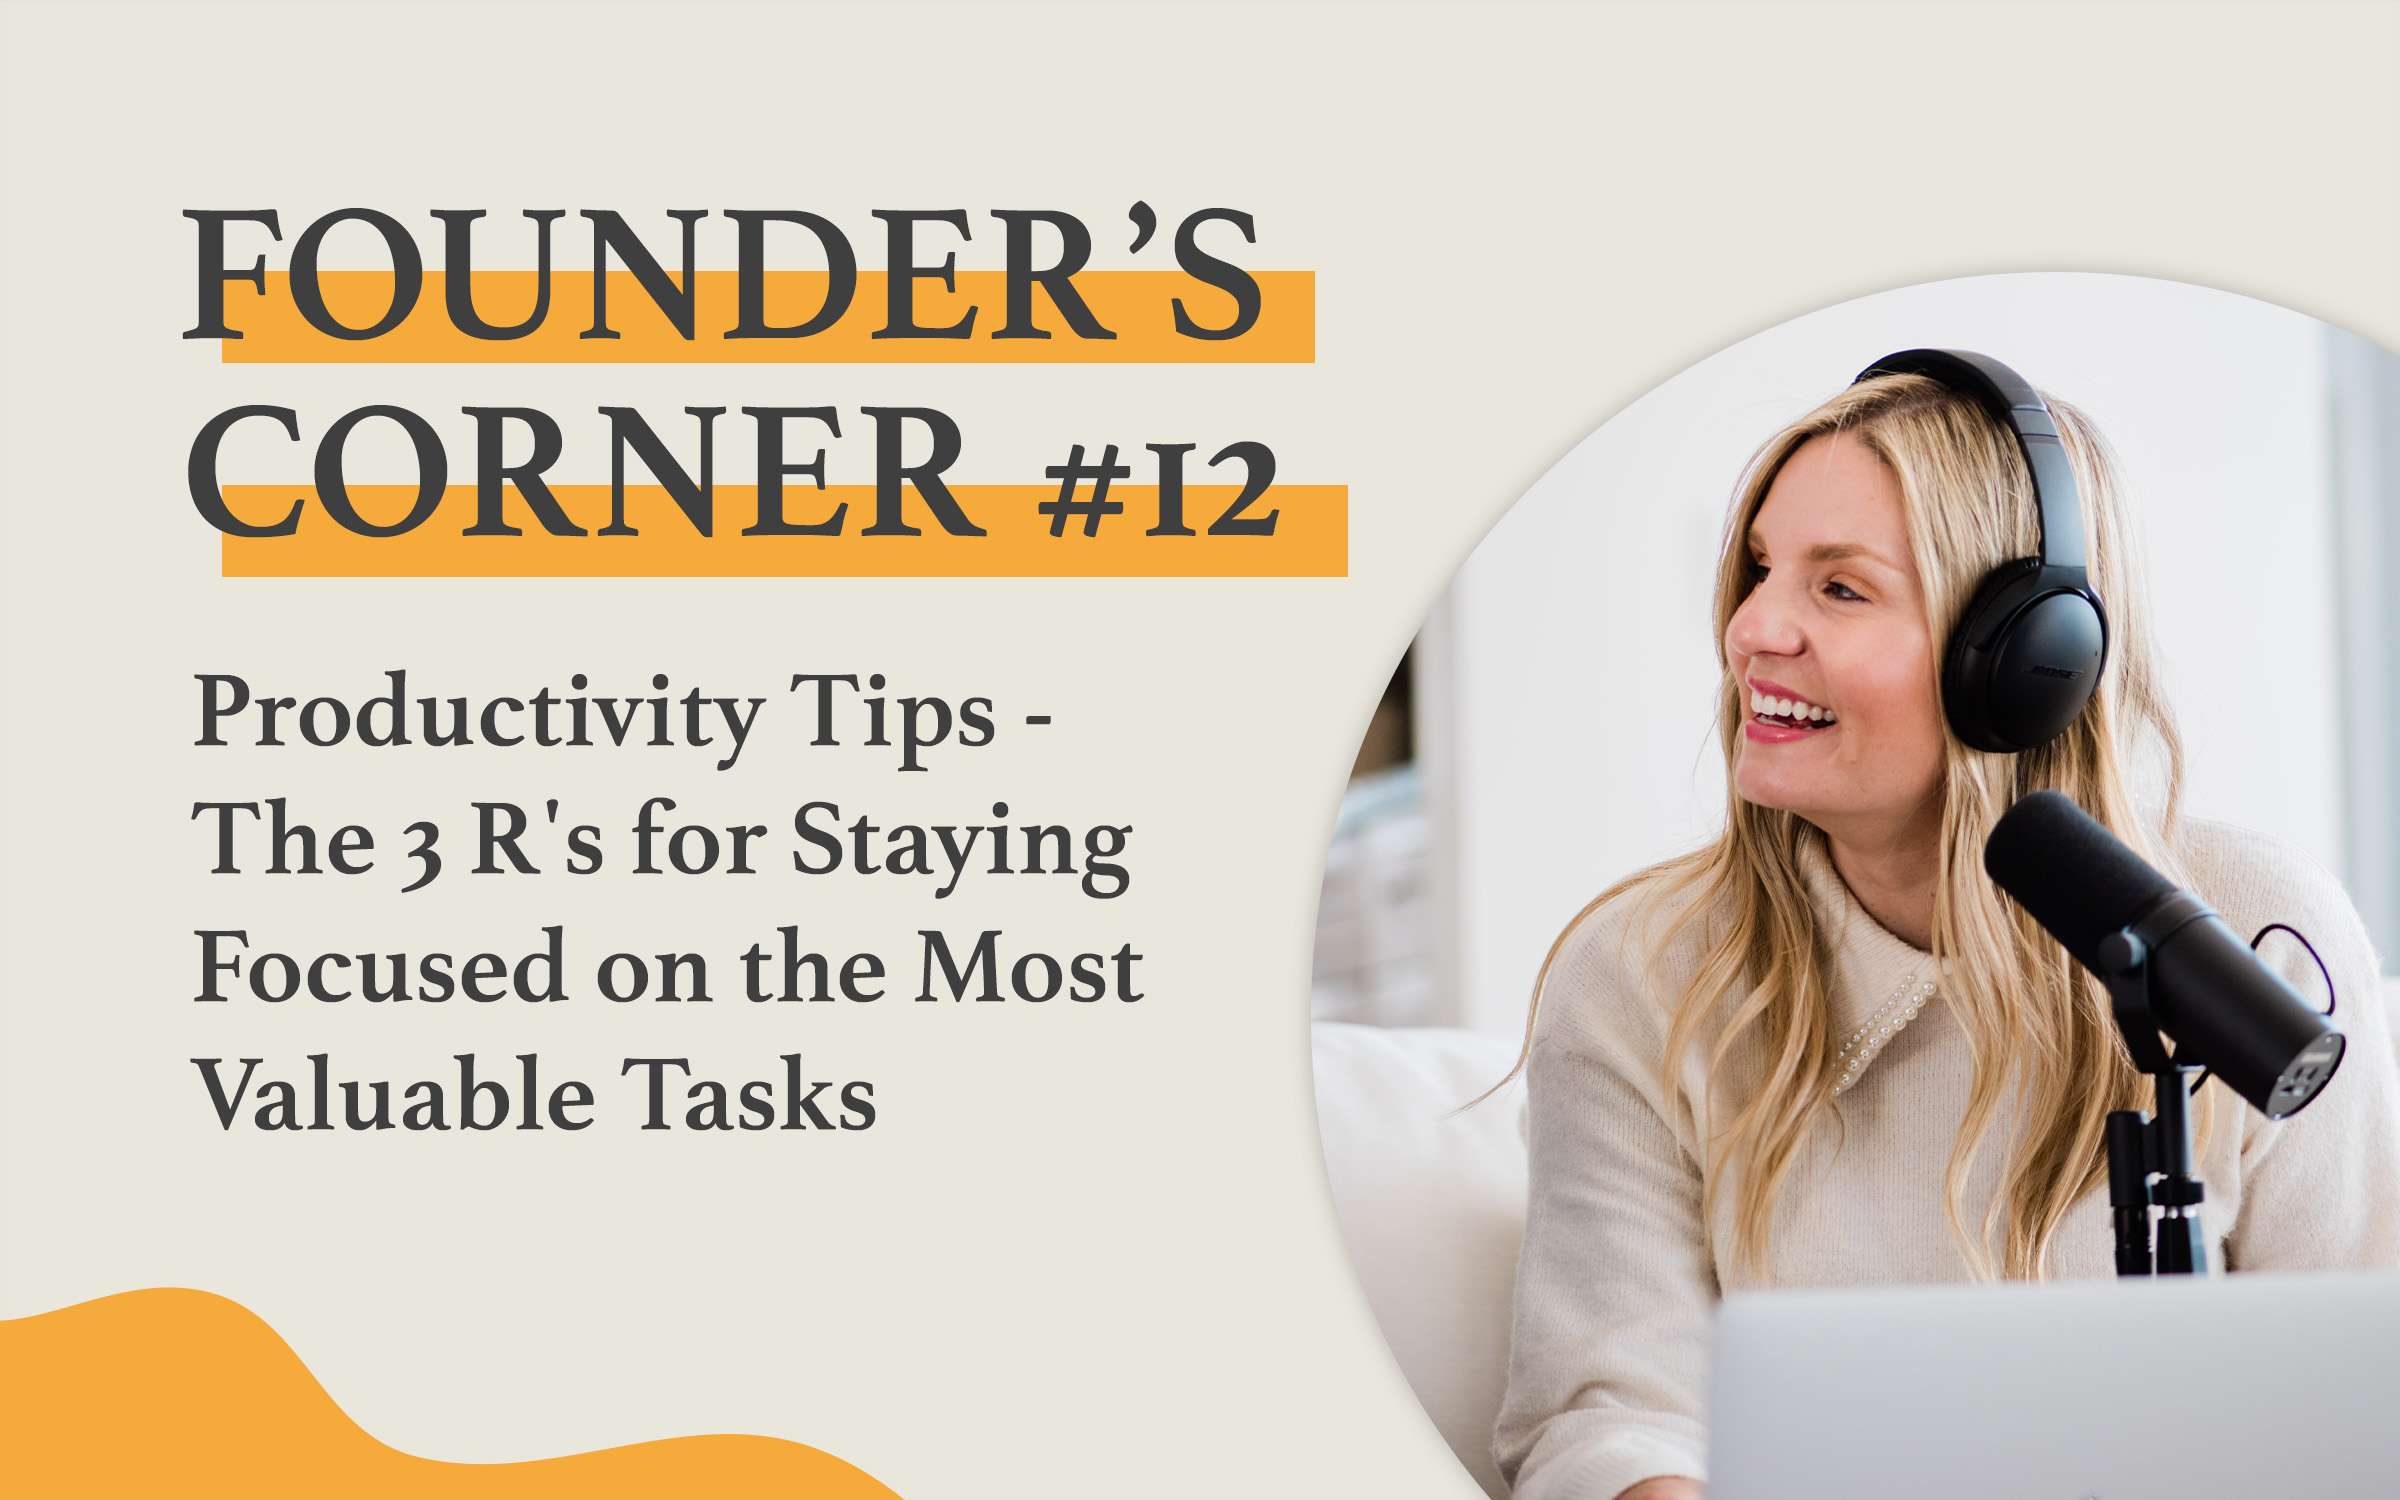 Founder's Corner #12: Productivity Tips - The 3 R's for Staying Focused on the Most Valuable Tasks